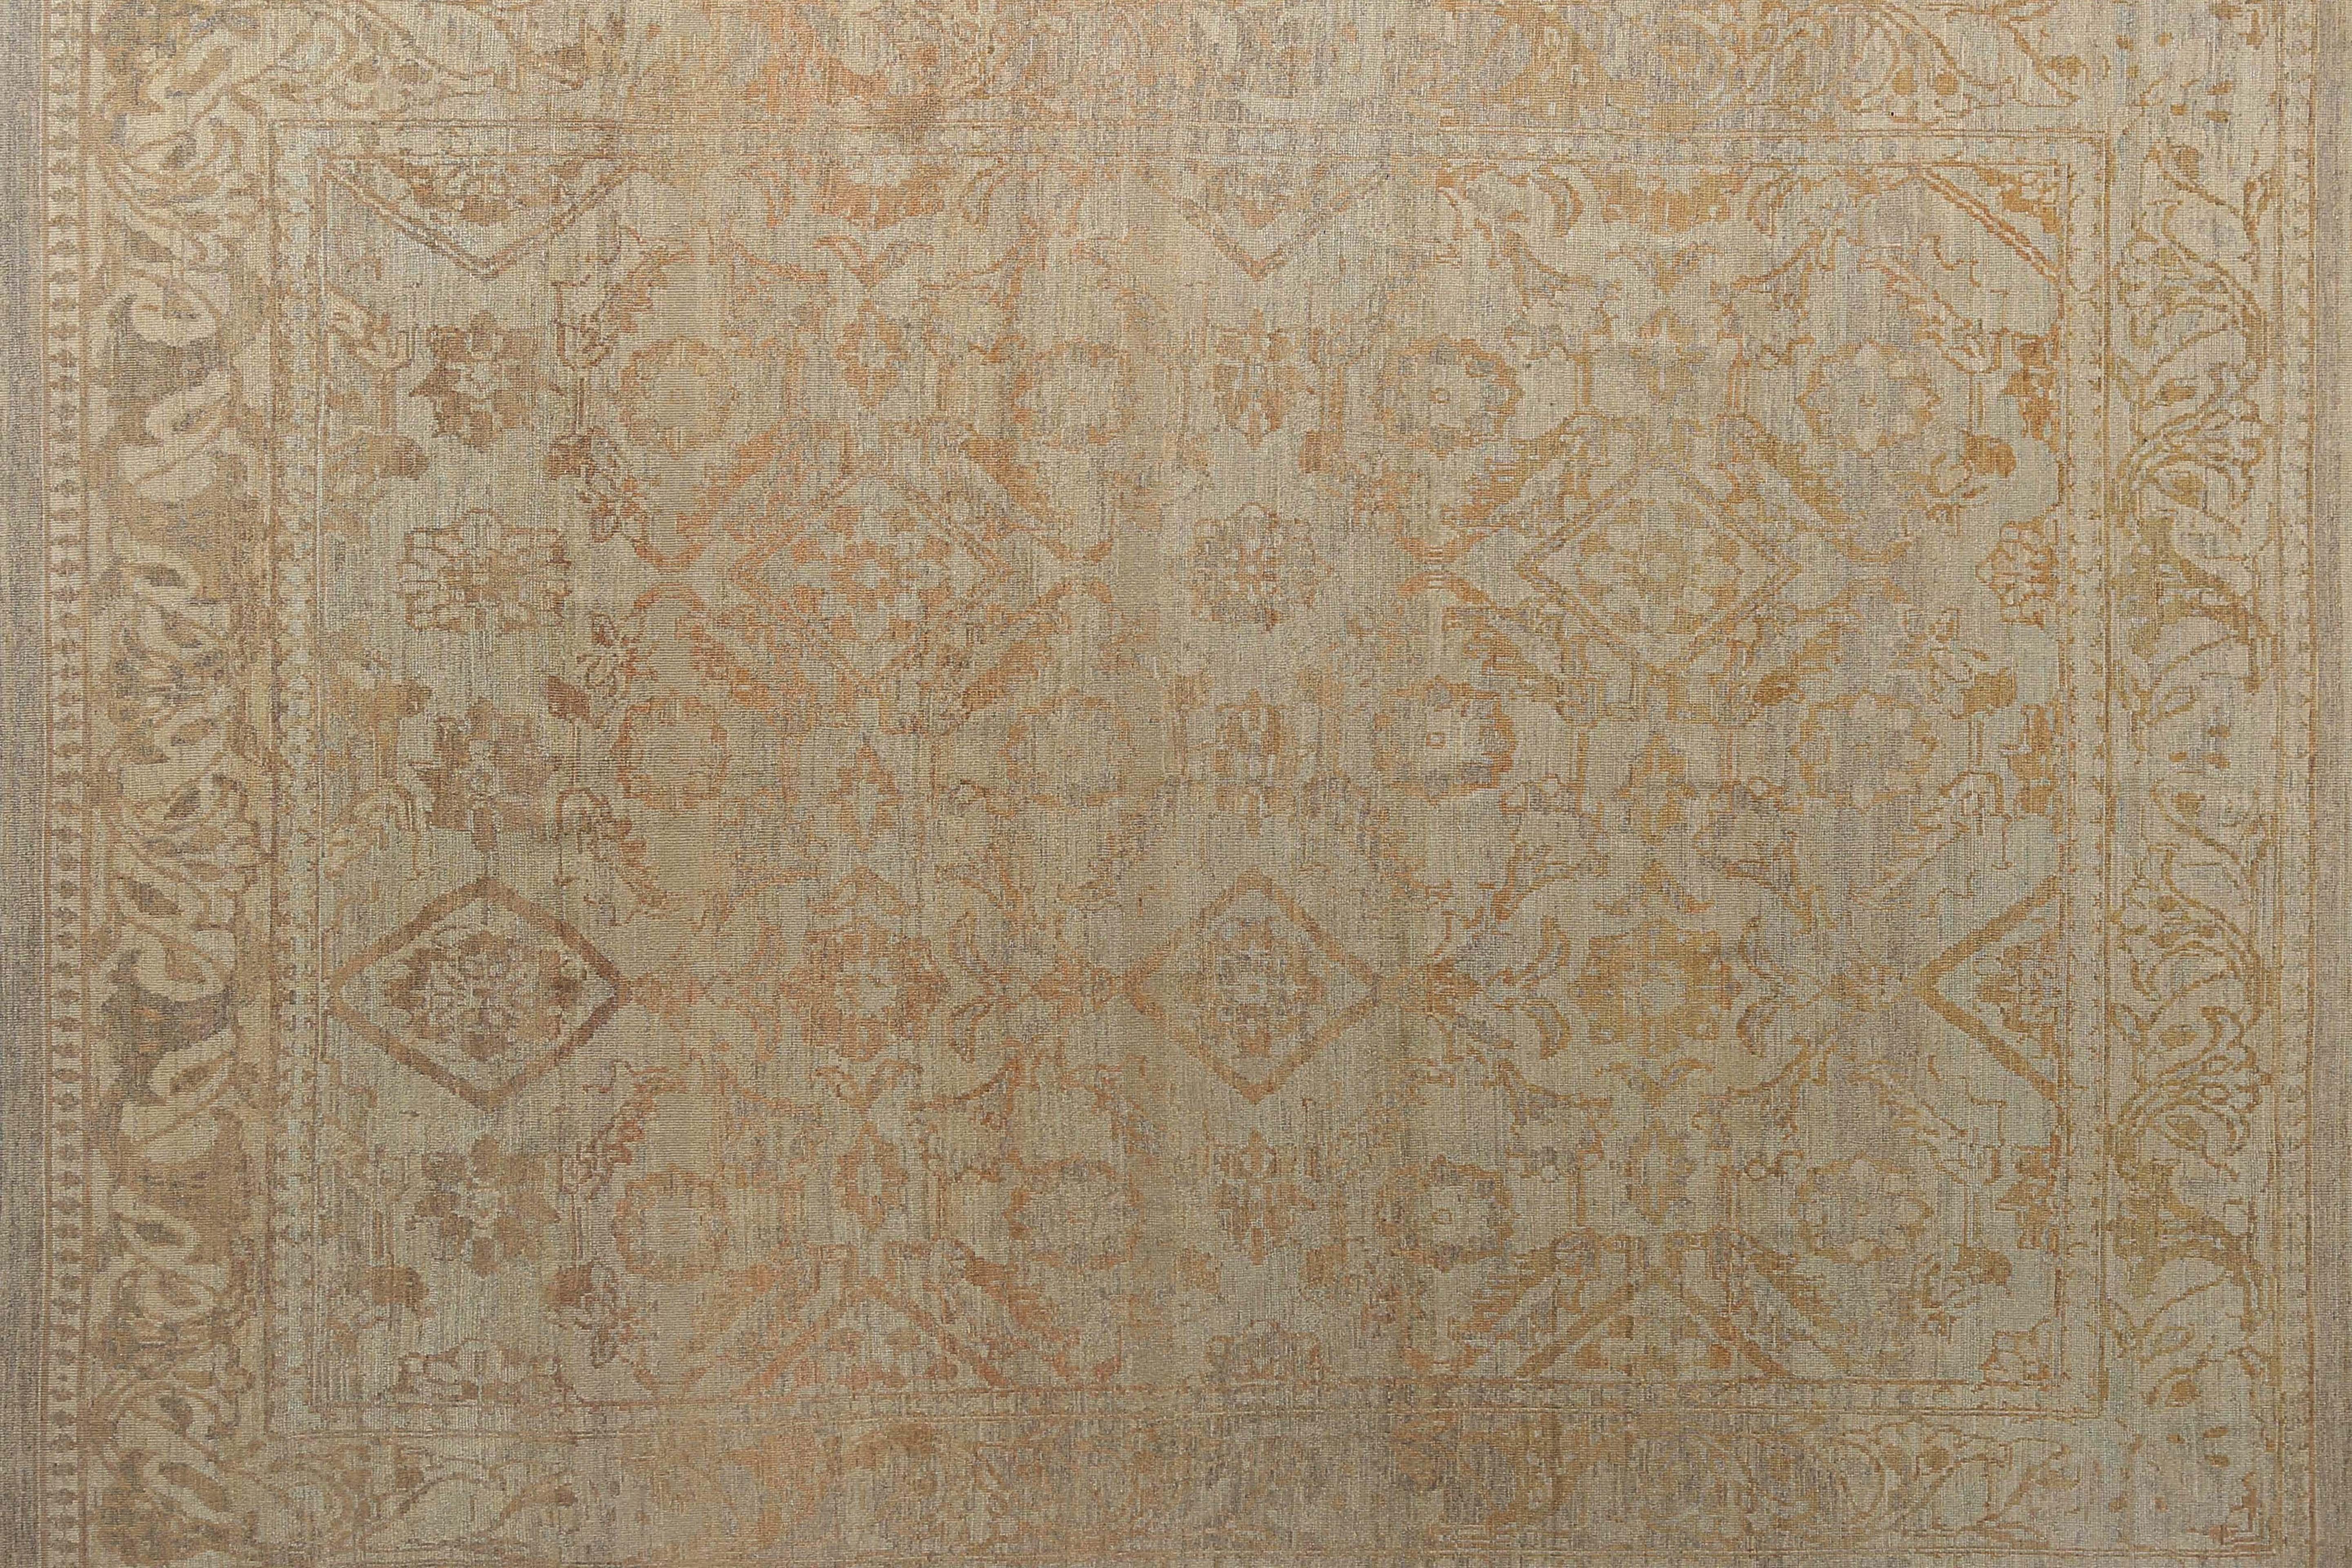 Stunning Turkish Sultanabad Muted Colors For Sale 5